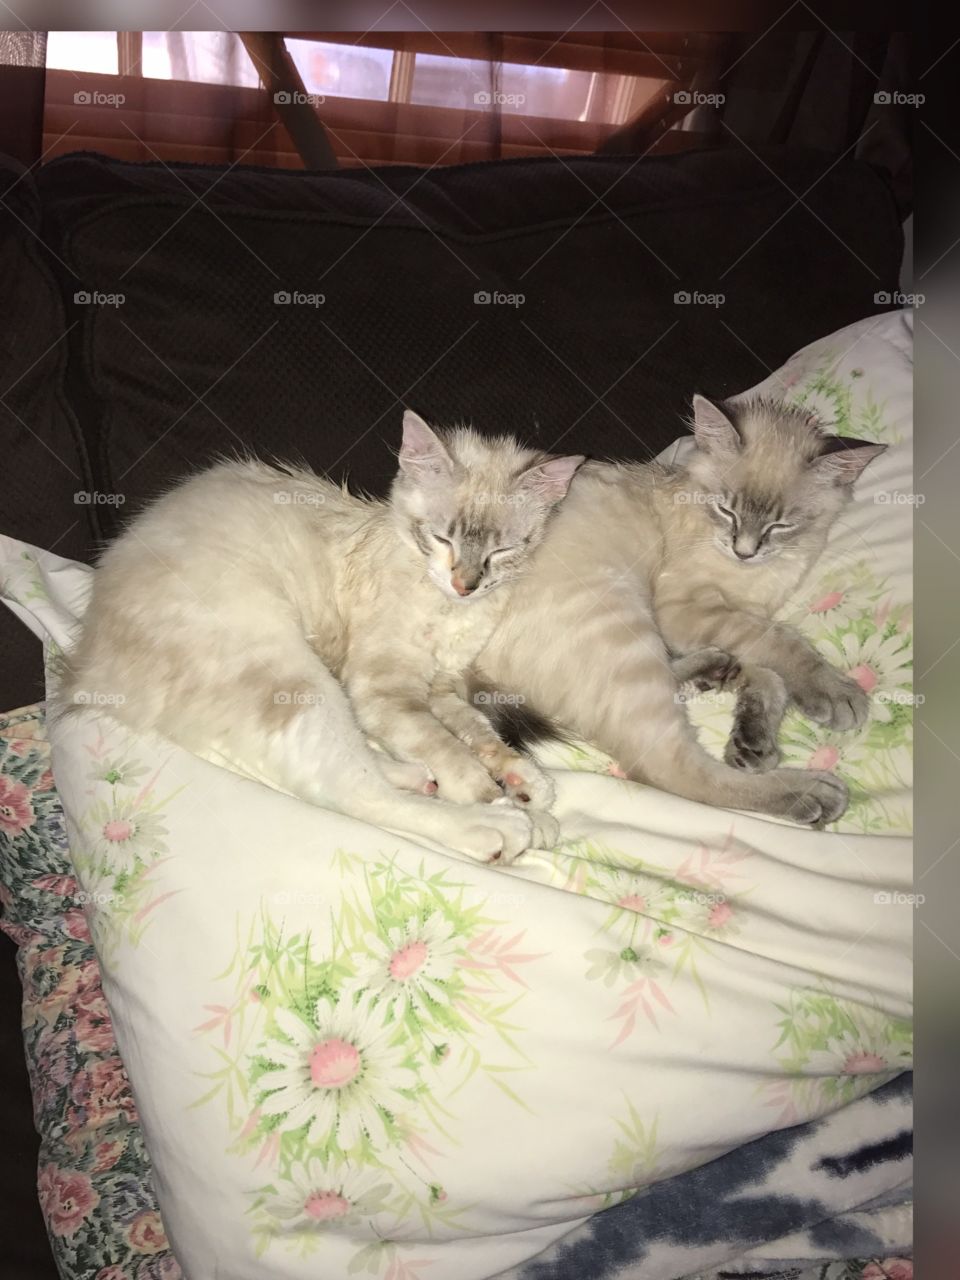 Our cute twins snuggle